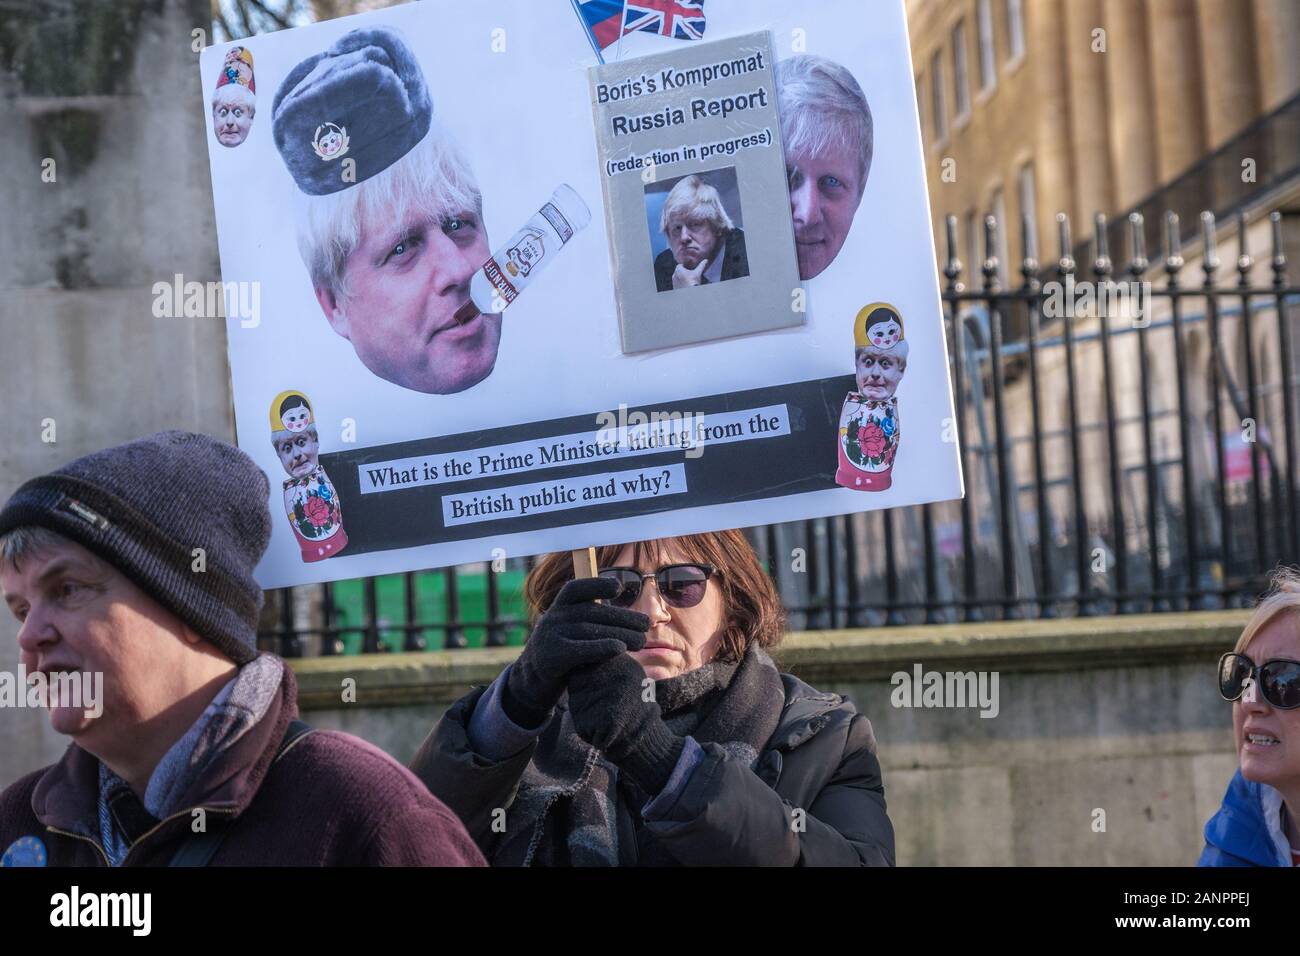 London, UK. 18th January 2019. Protesters at Downing St call for the report on Russian interference in UK politics to be released. Ready before the election, they say it was suppressed by Boris Johnson because it revealed important Russian interference in UK politics including large donations to the Conservative Party and pro-Brexit ca campaingns which amount to a Russian based coup.  Peter Marshall/Alamy Live News Stock Photo